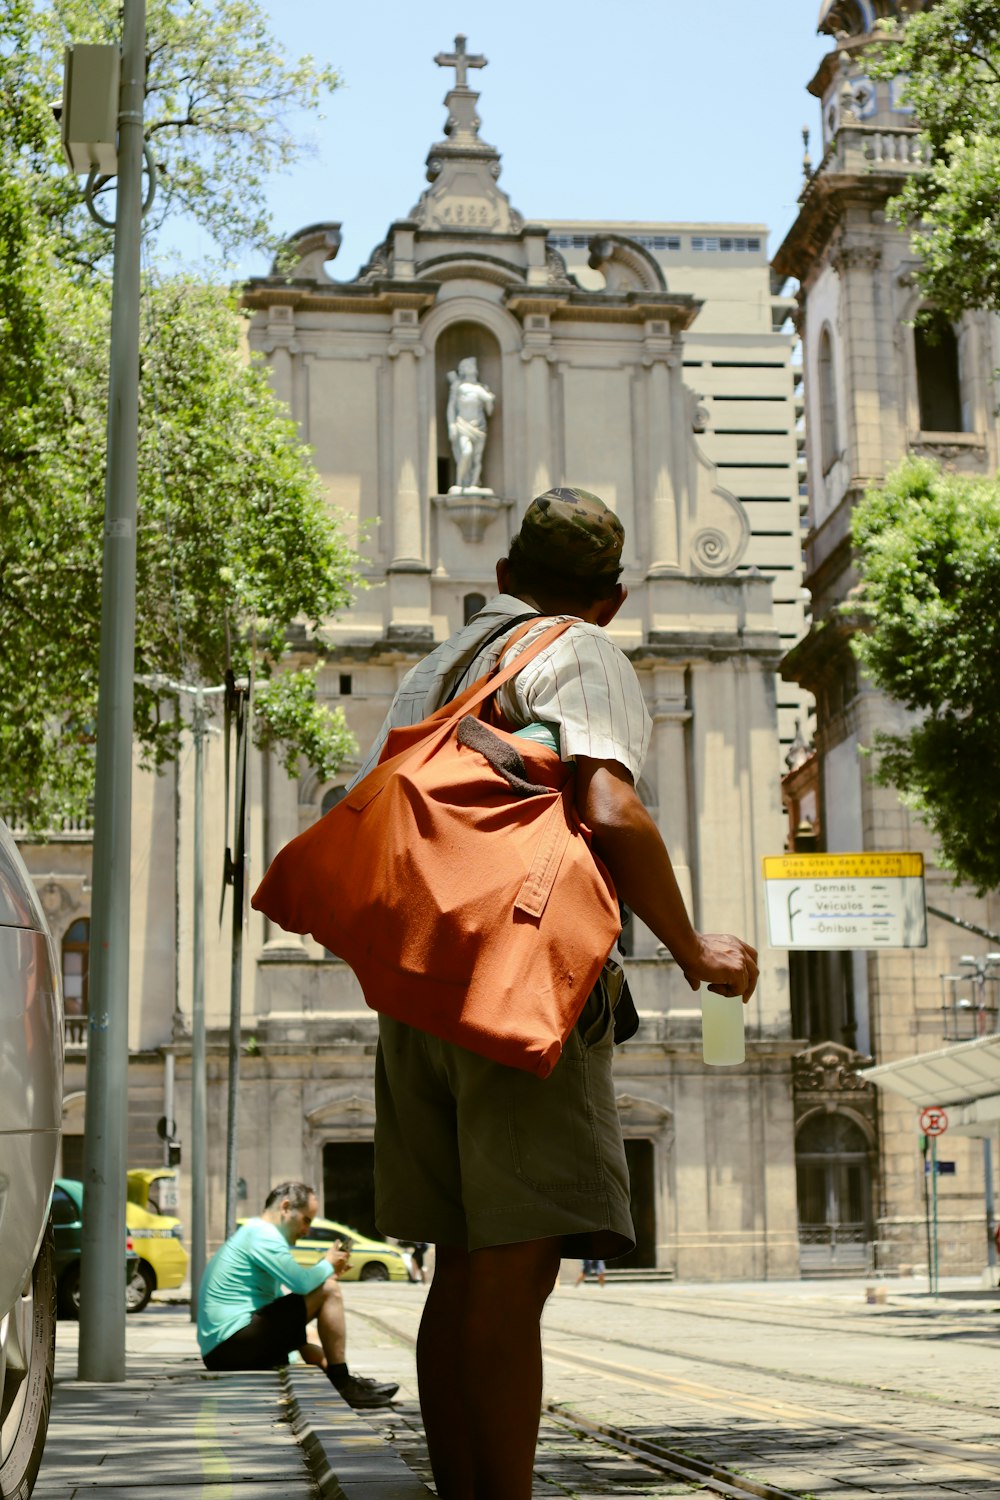 a man walking down a street with a bag on his back